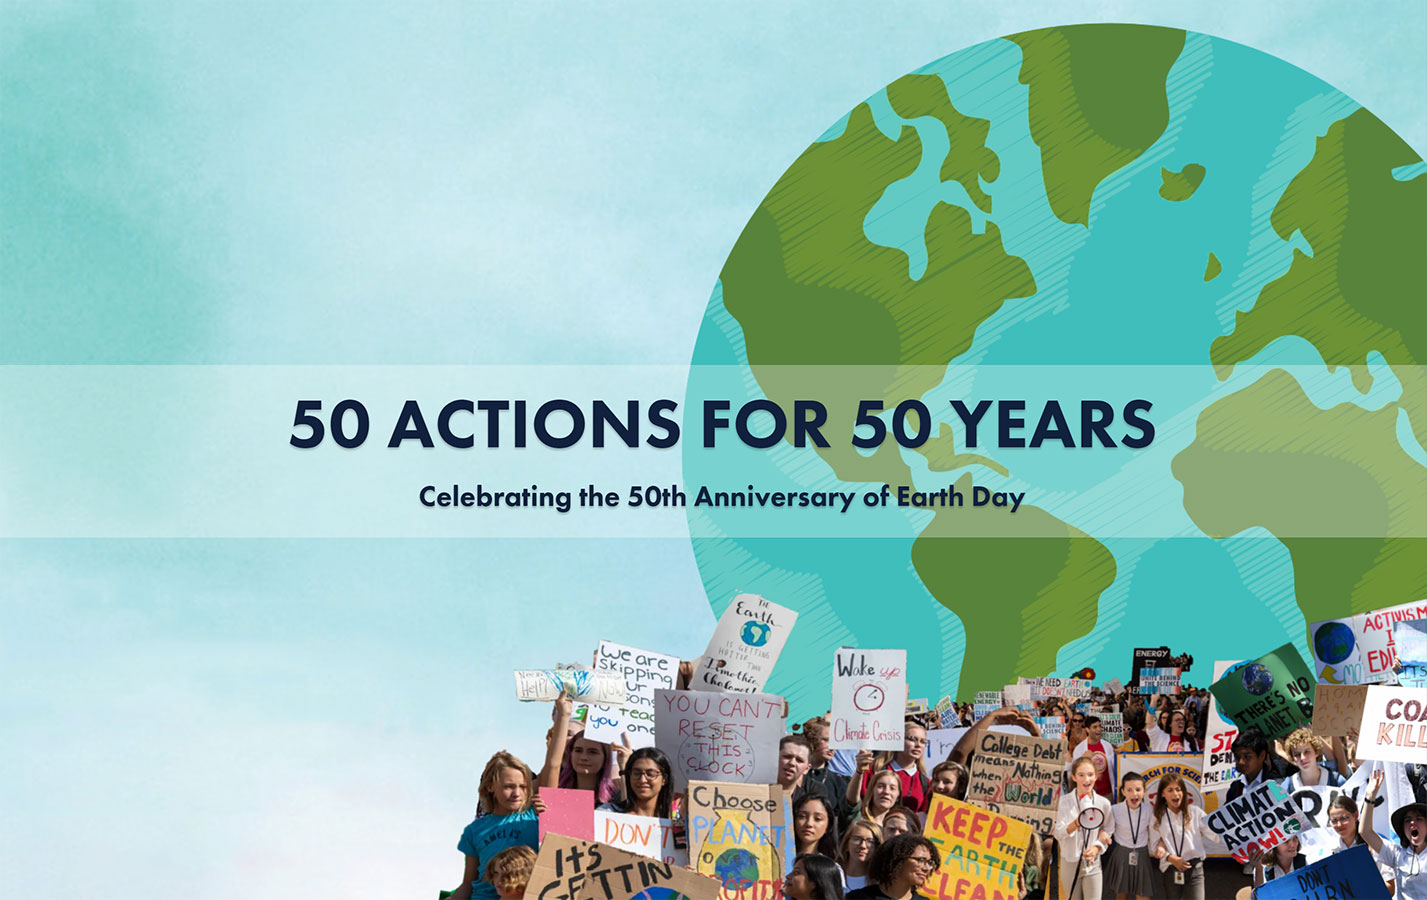 50 Actions for 50 Years: Celebrating the 50th Anniversary of Earth Day